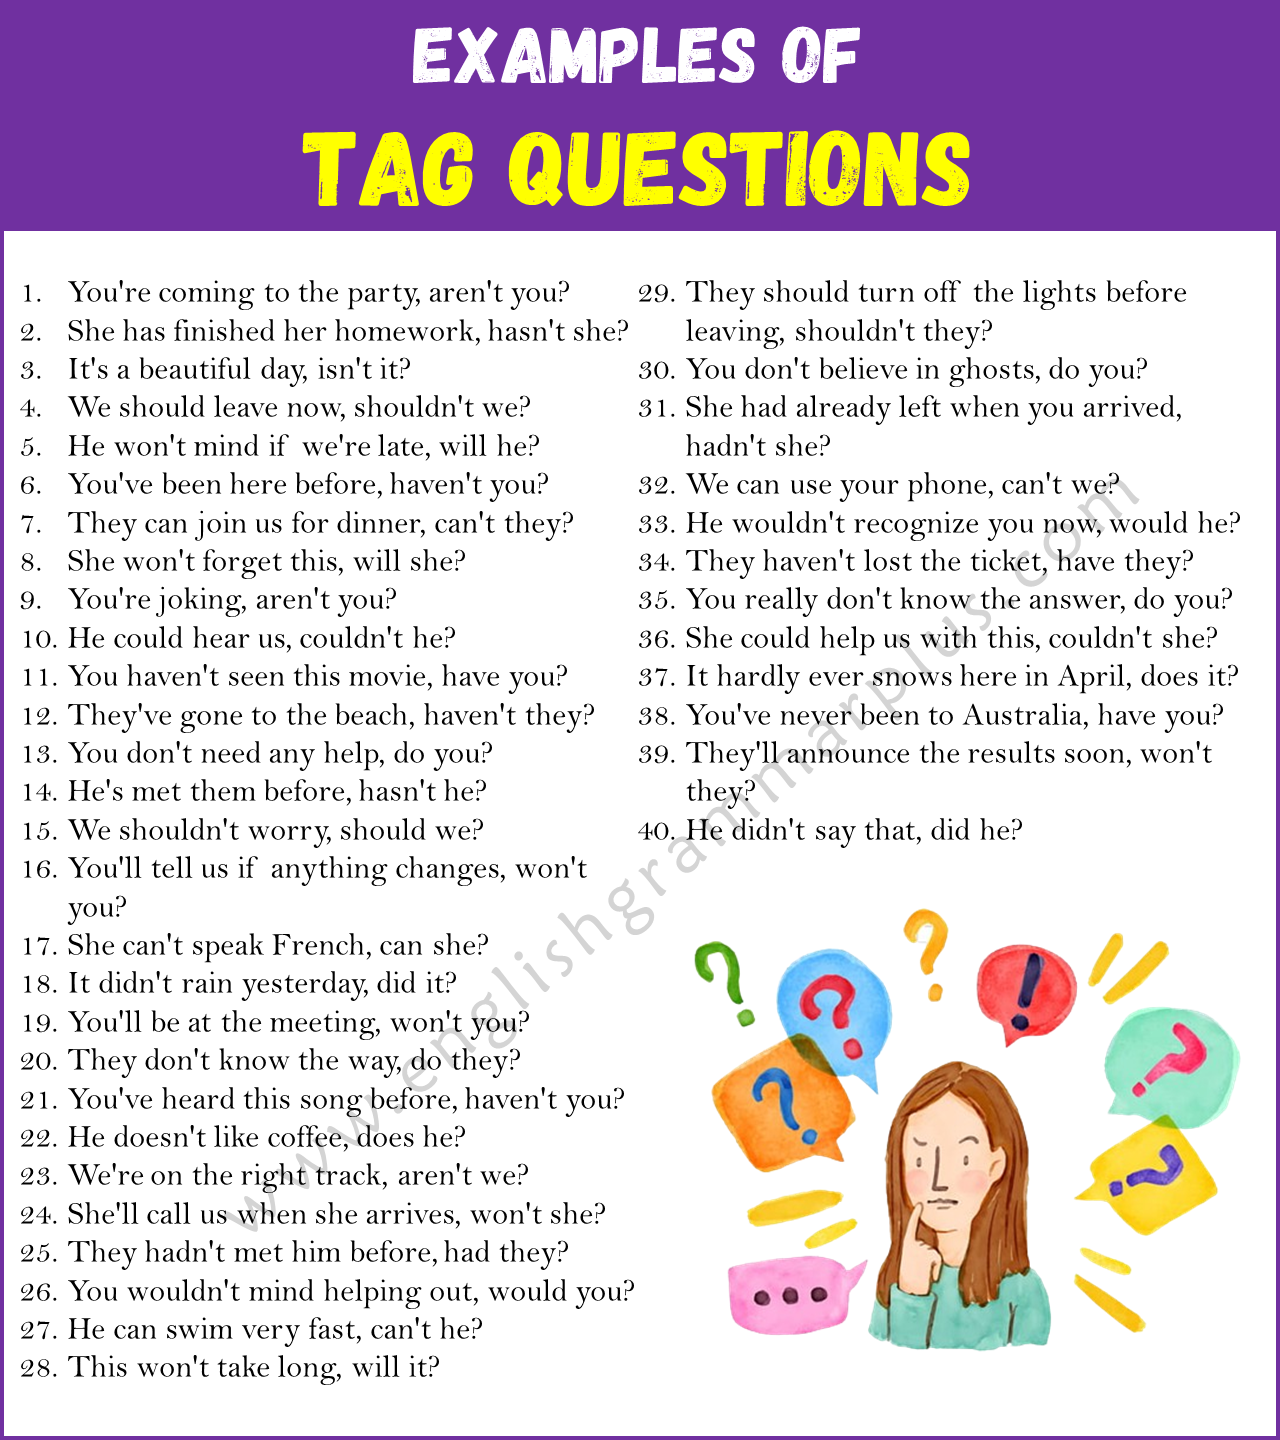 Examples of Tag Questions in English